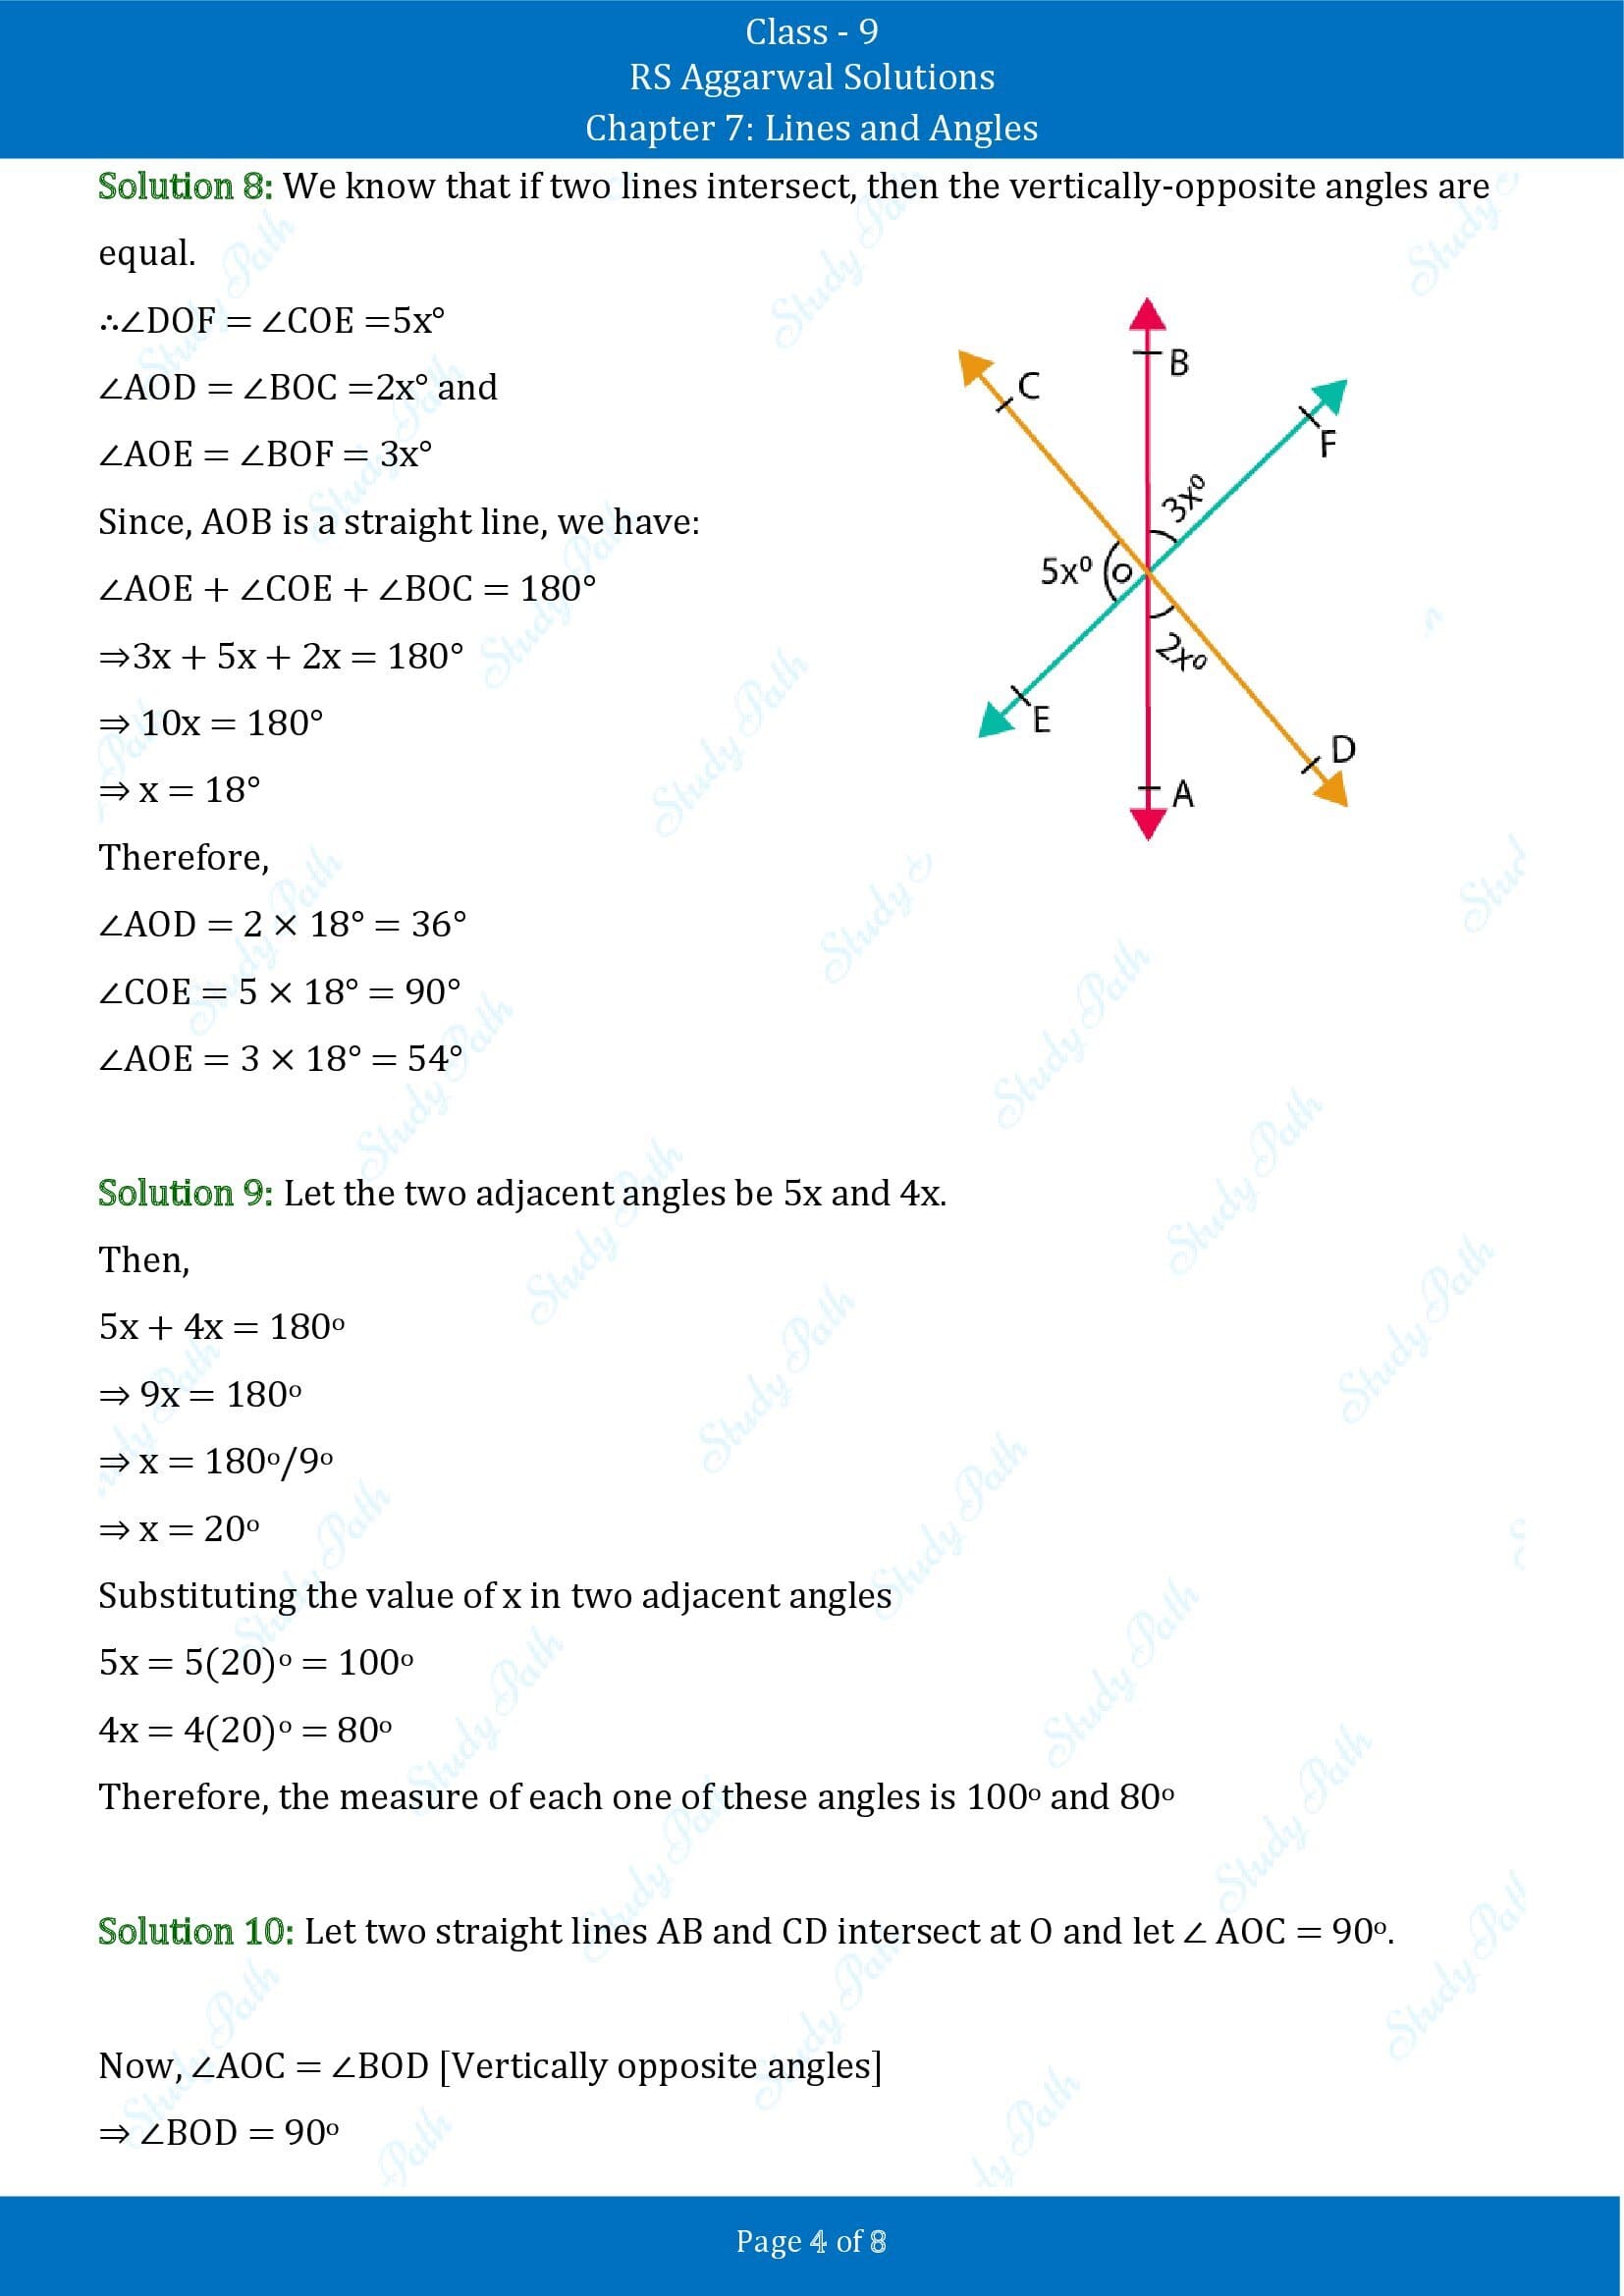 RS Aggarwal Solutions Class 9 Chapter 7 Lines and Angles Exercise 7B 00004